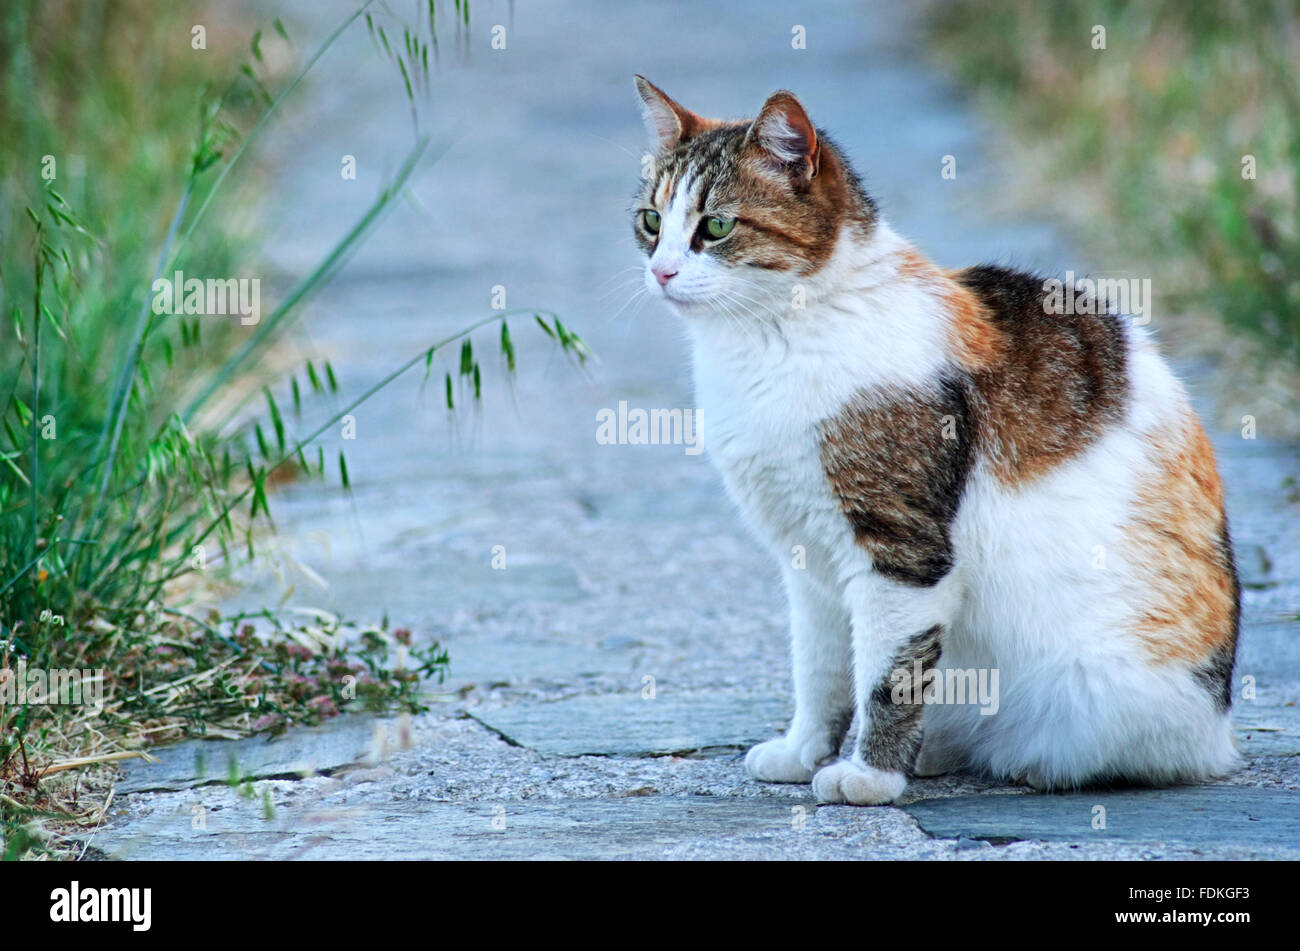 Chat Calico sitting outdoors Banque D'Images